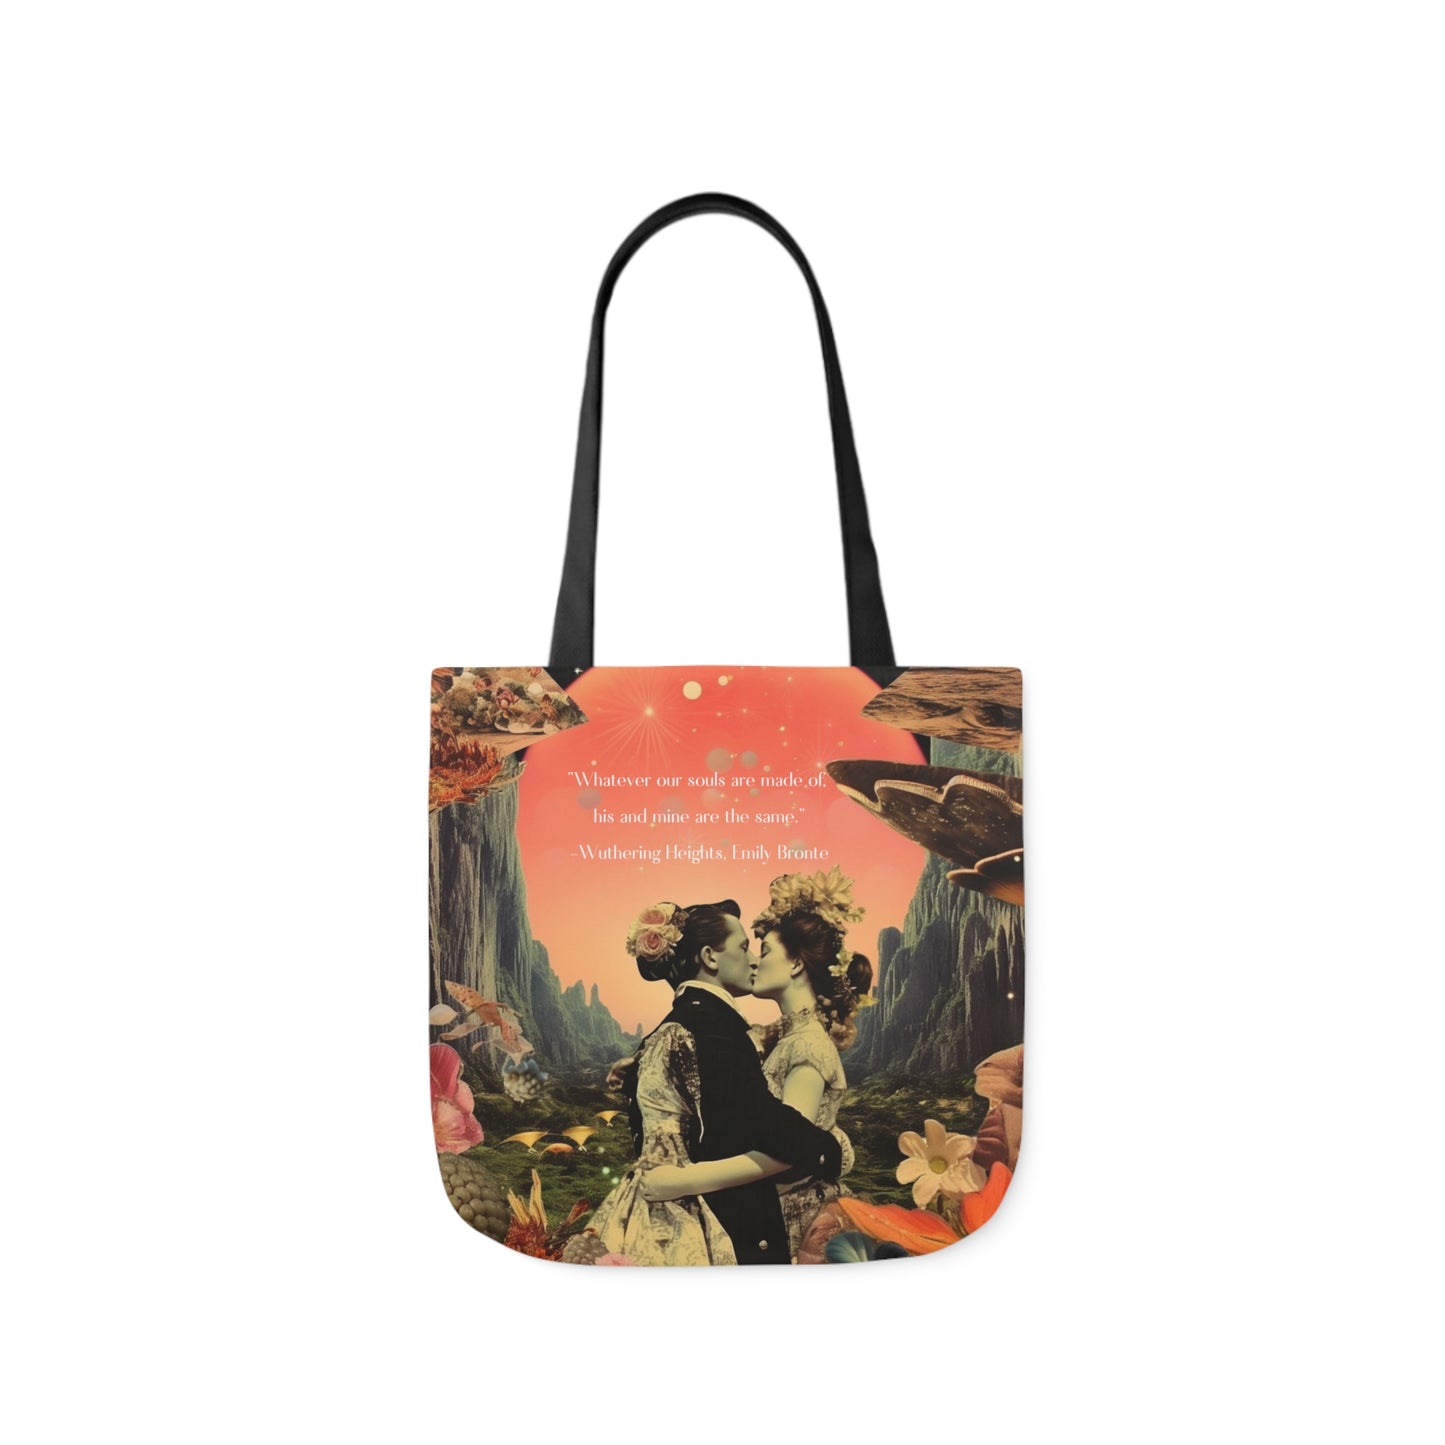 'Whatever our souls', from Wuthering Heights by Emily Bronte quote, Tote Bag